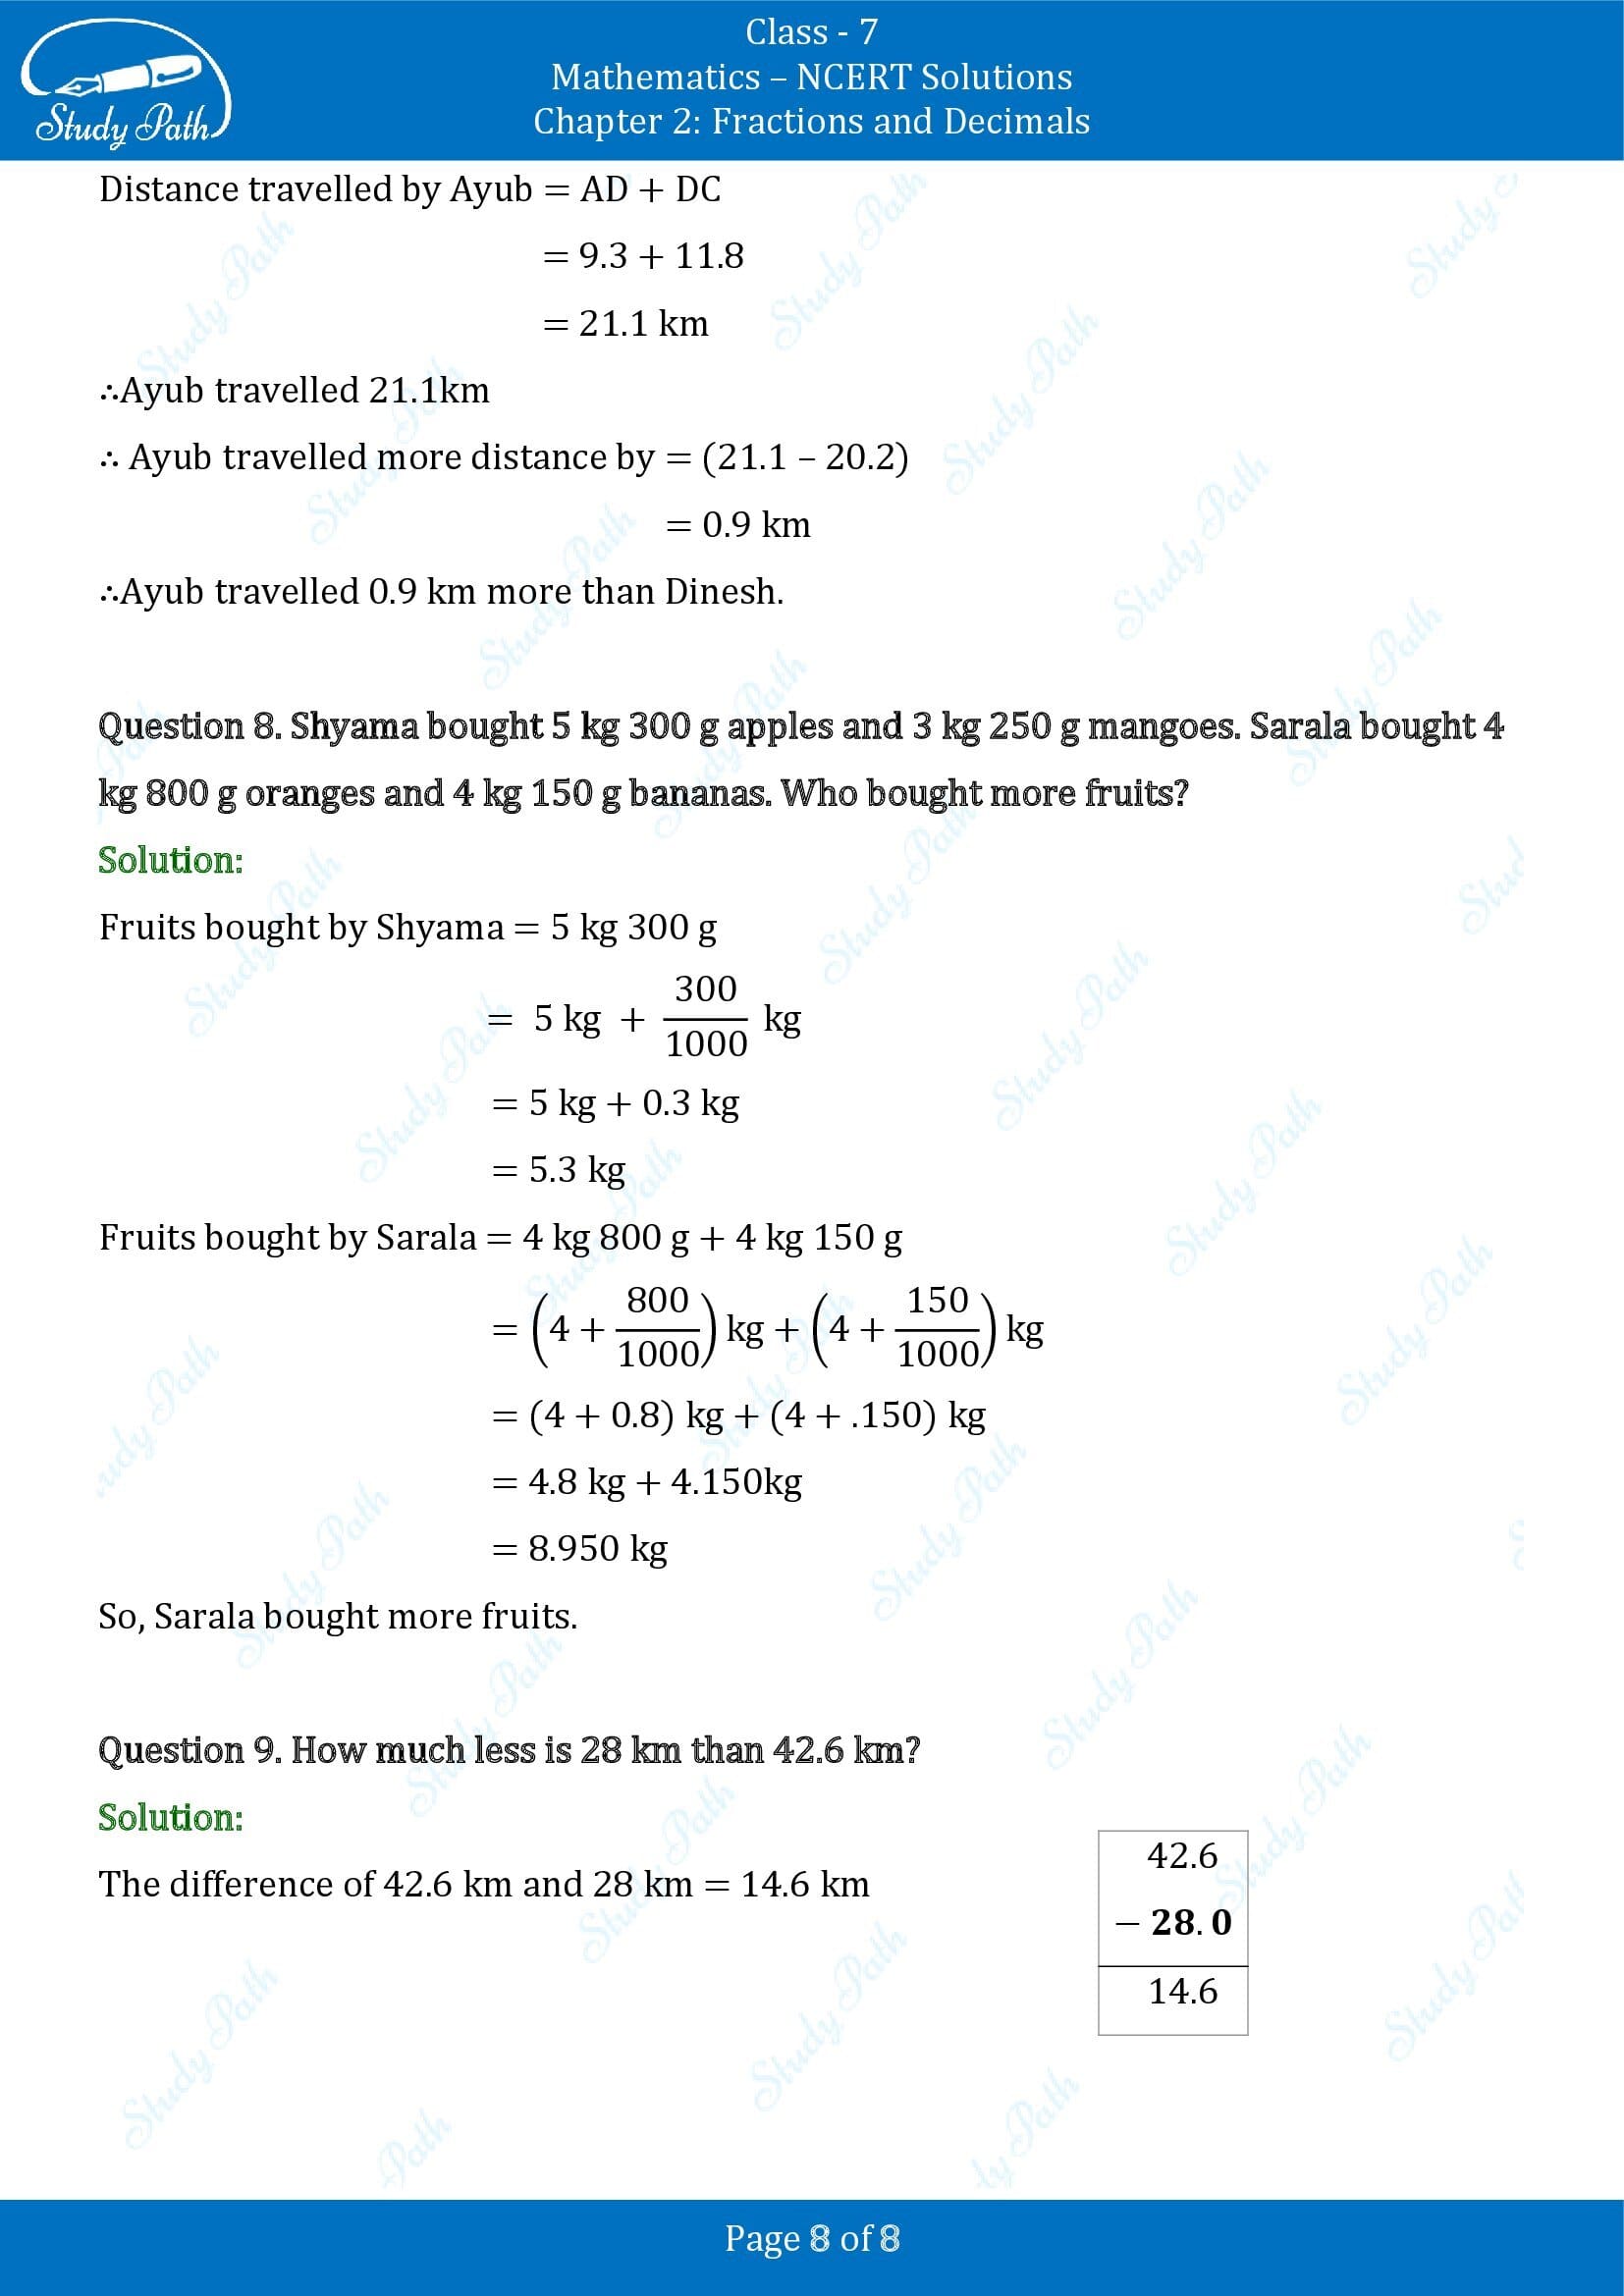 NCERT Solutions for Class 7 Maths Chapter 2 Fractions and Decimals Exercise 2.5 00008